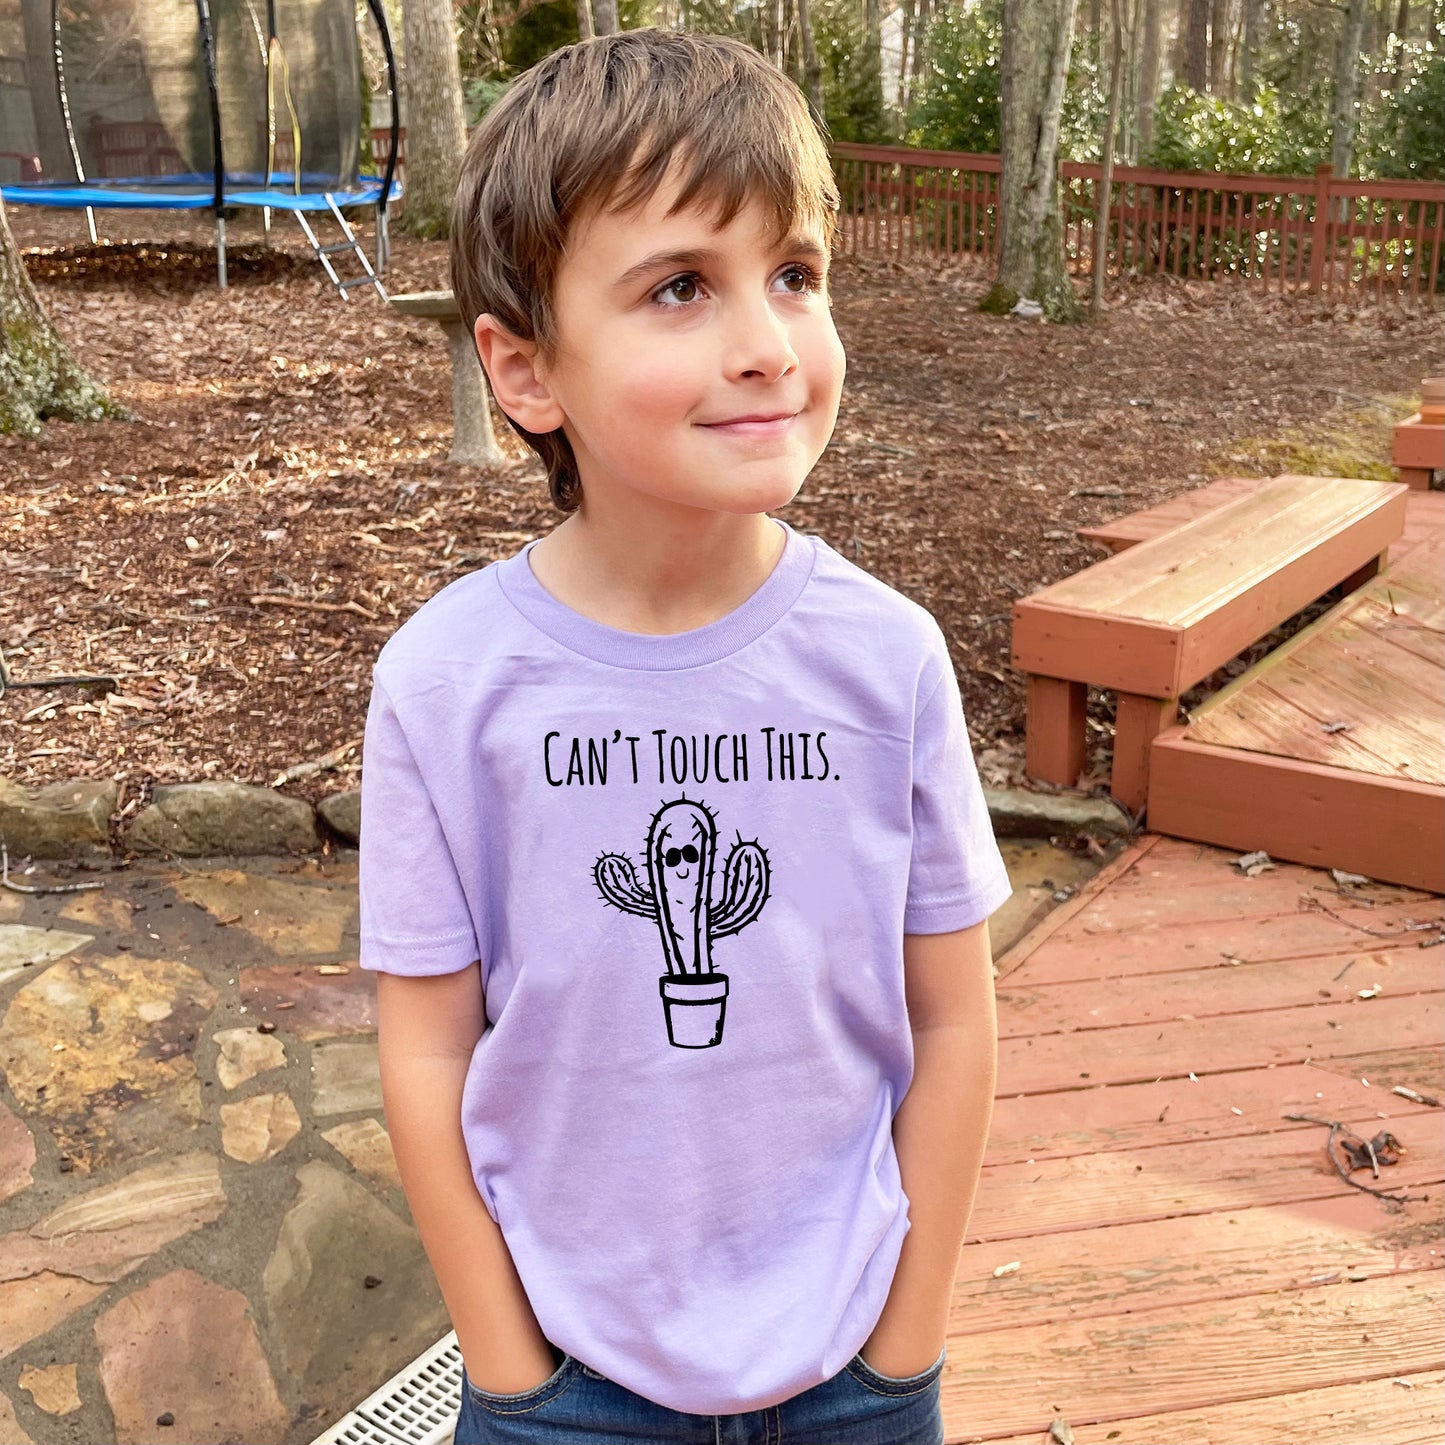 Can't Touch This (Cactus) - Kid's Tee - Columbia Blue or Lavender